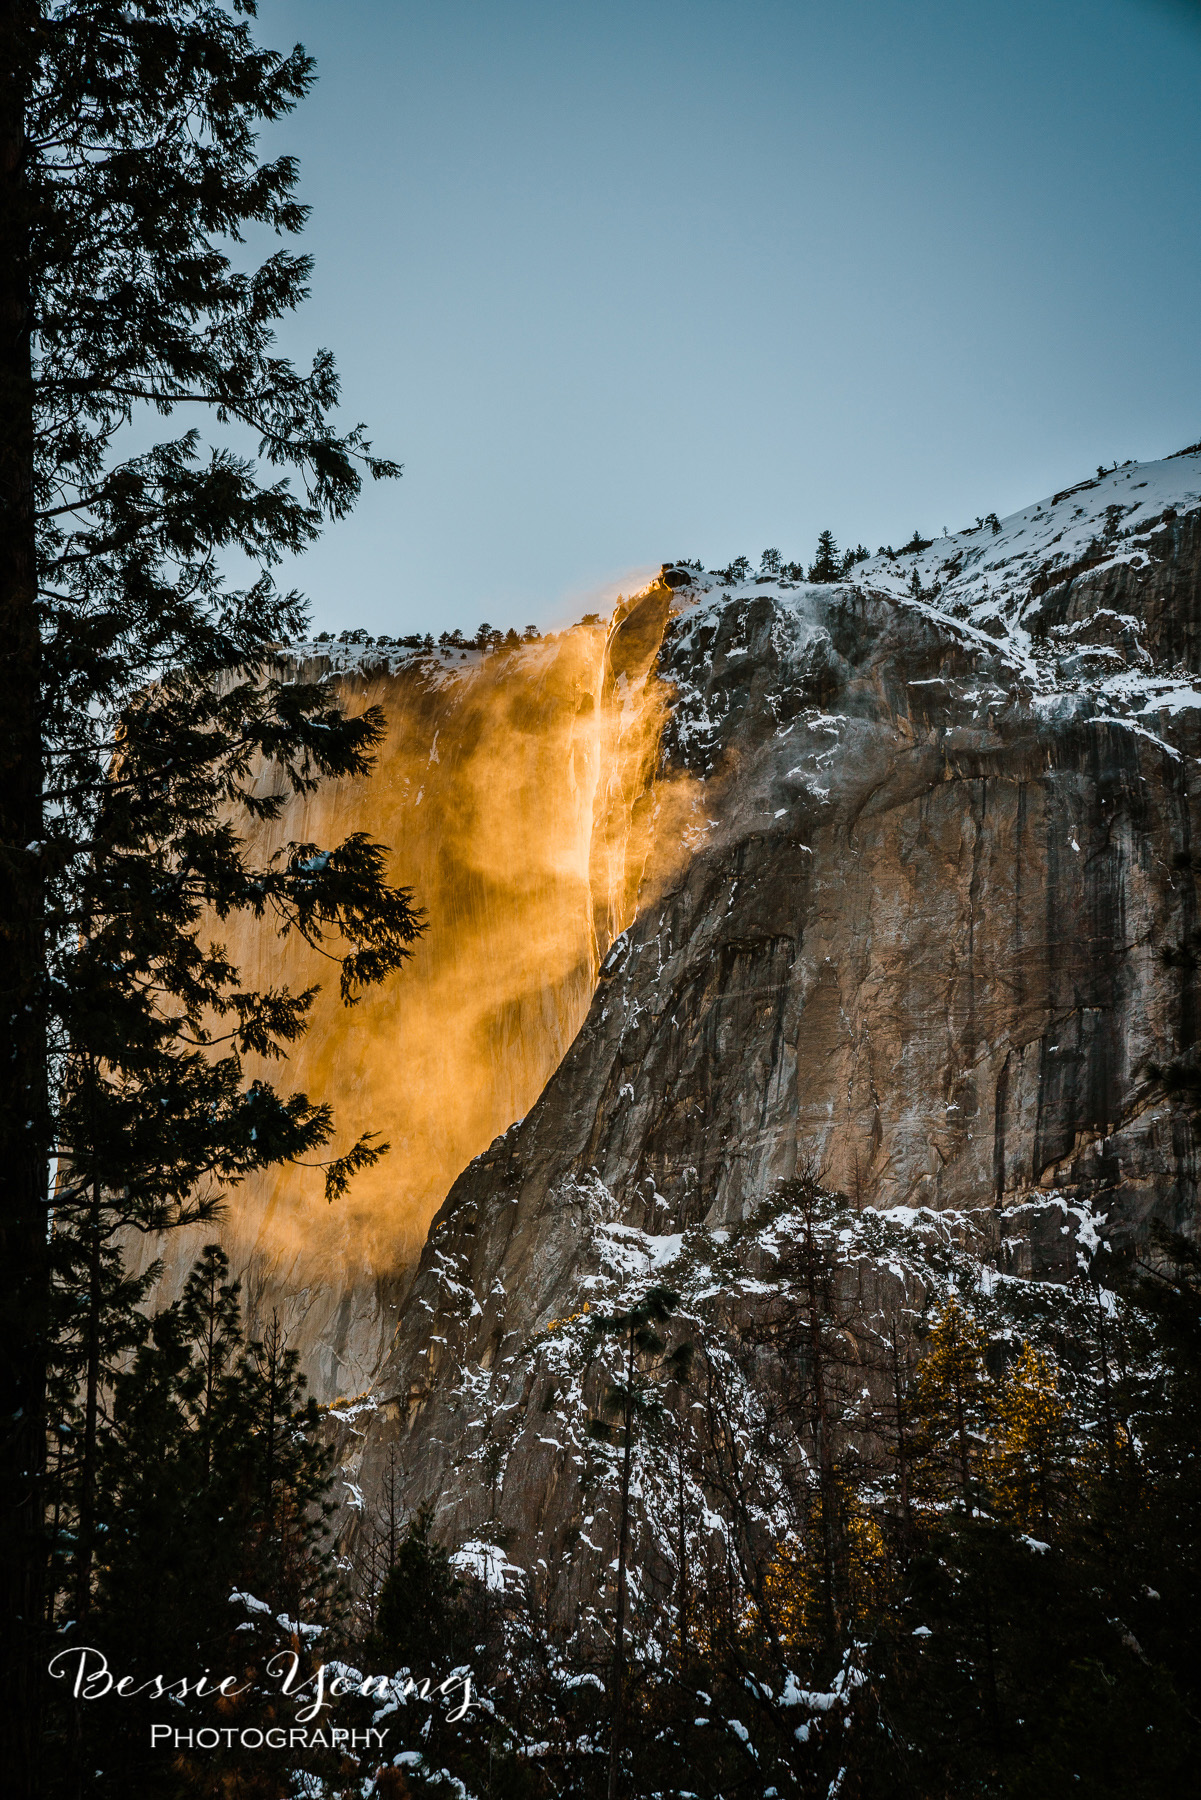 Yosemite National Park Firefall 2019 - Horsetail Fall - Landscape Photography by Bessie Young Photography - Yosemite National Park Photography